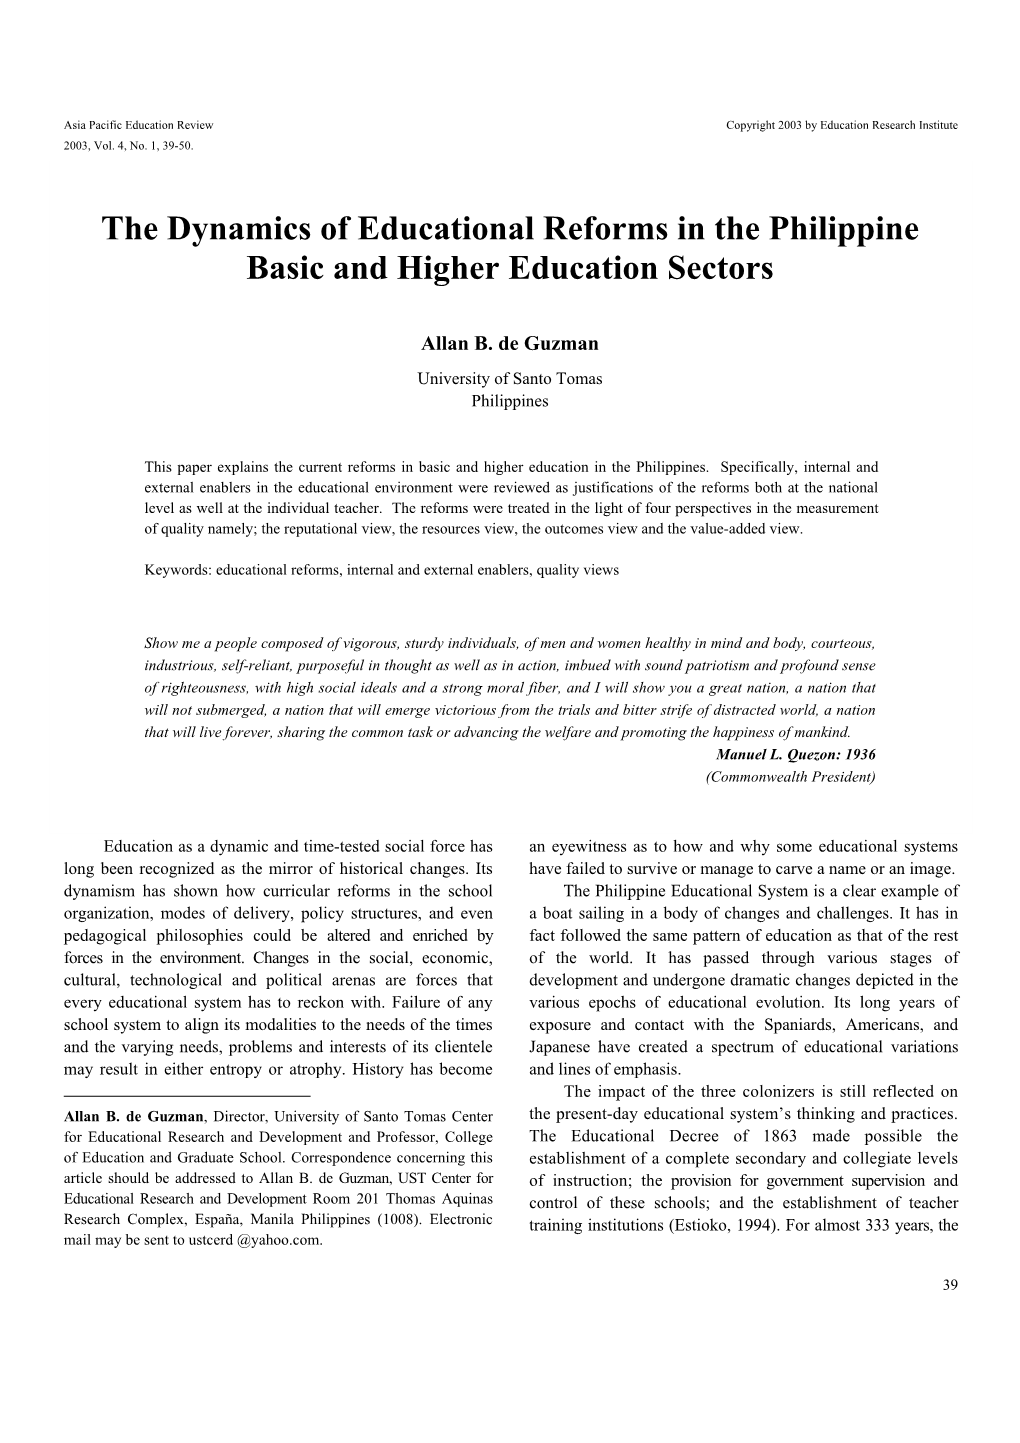 The Dynamics of Educational Reforms in the Philippine Basic and Higher Education Sectors